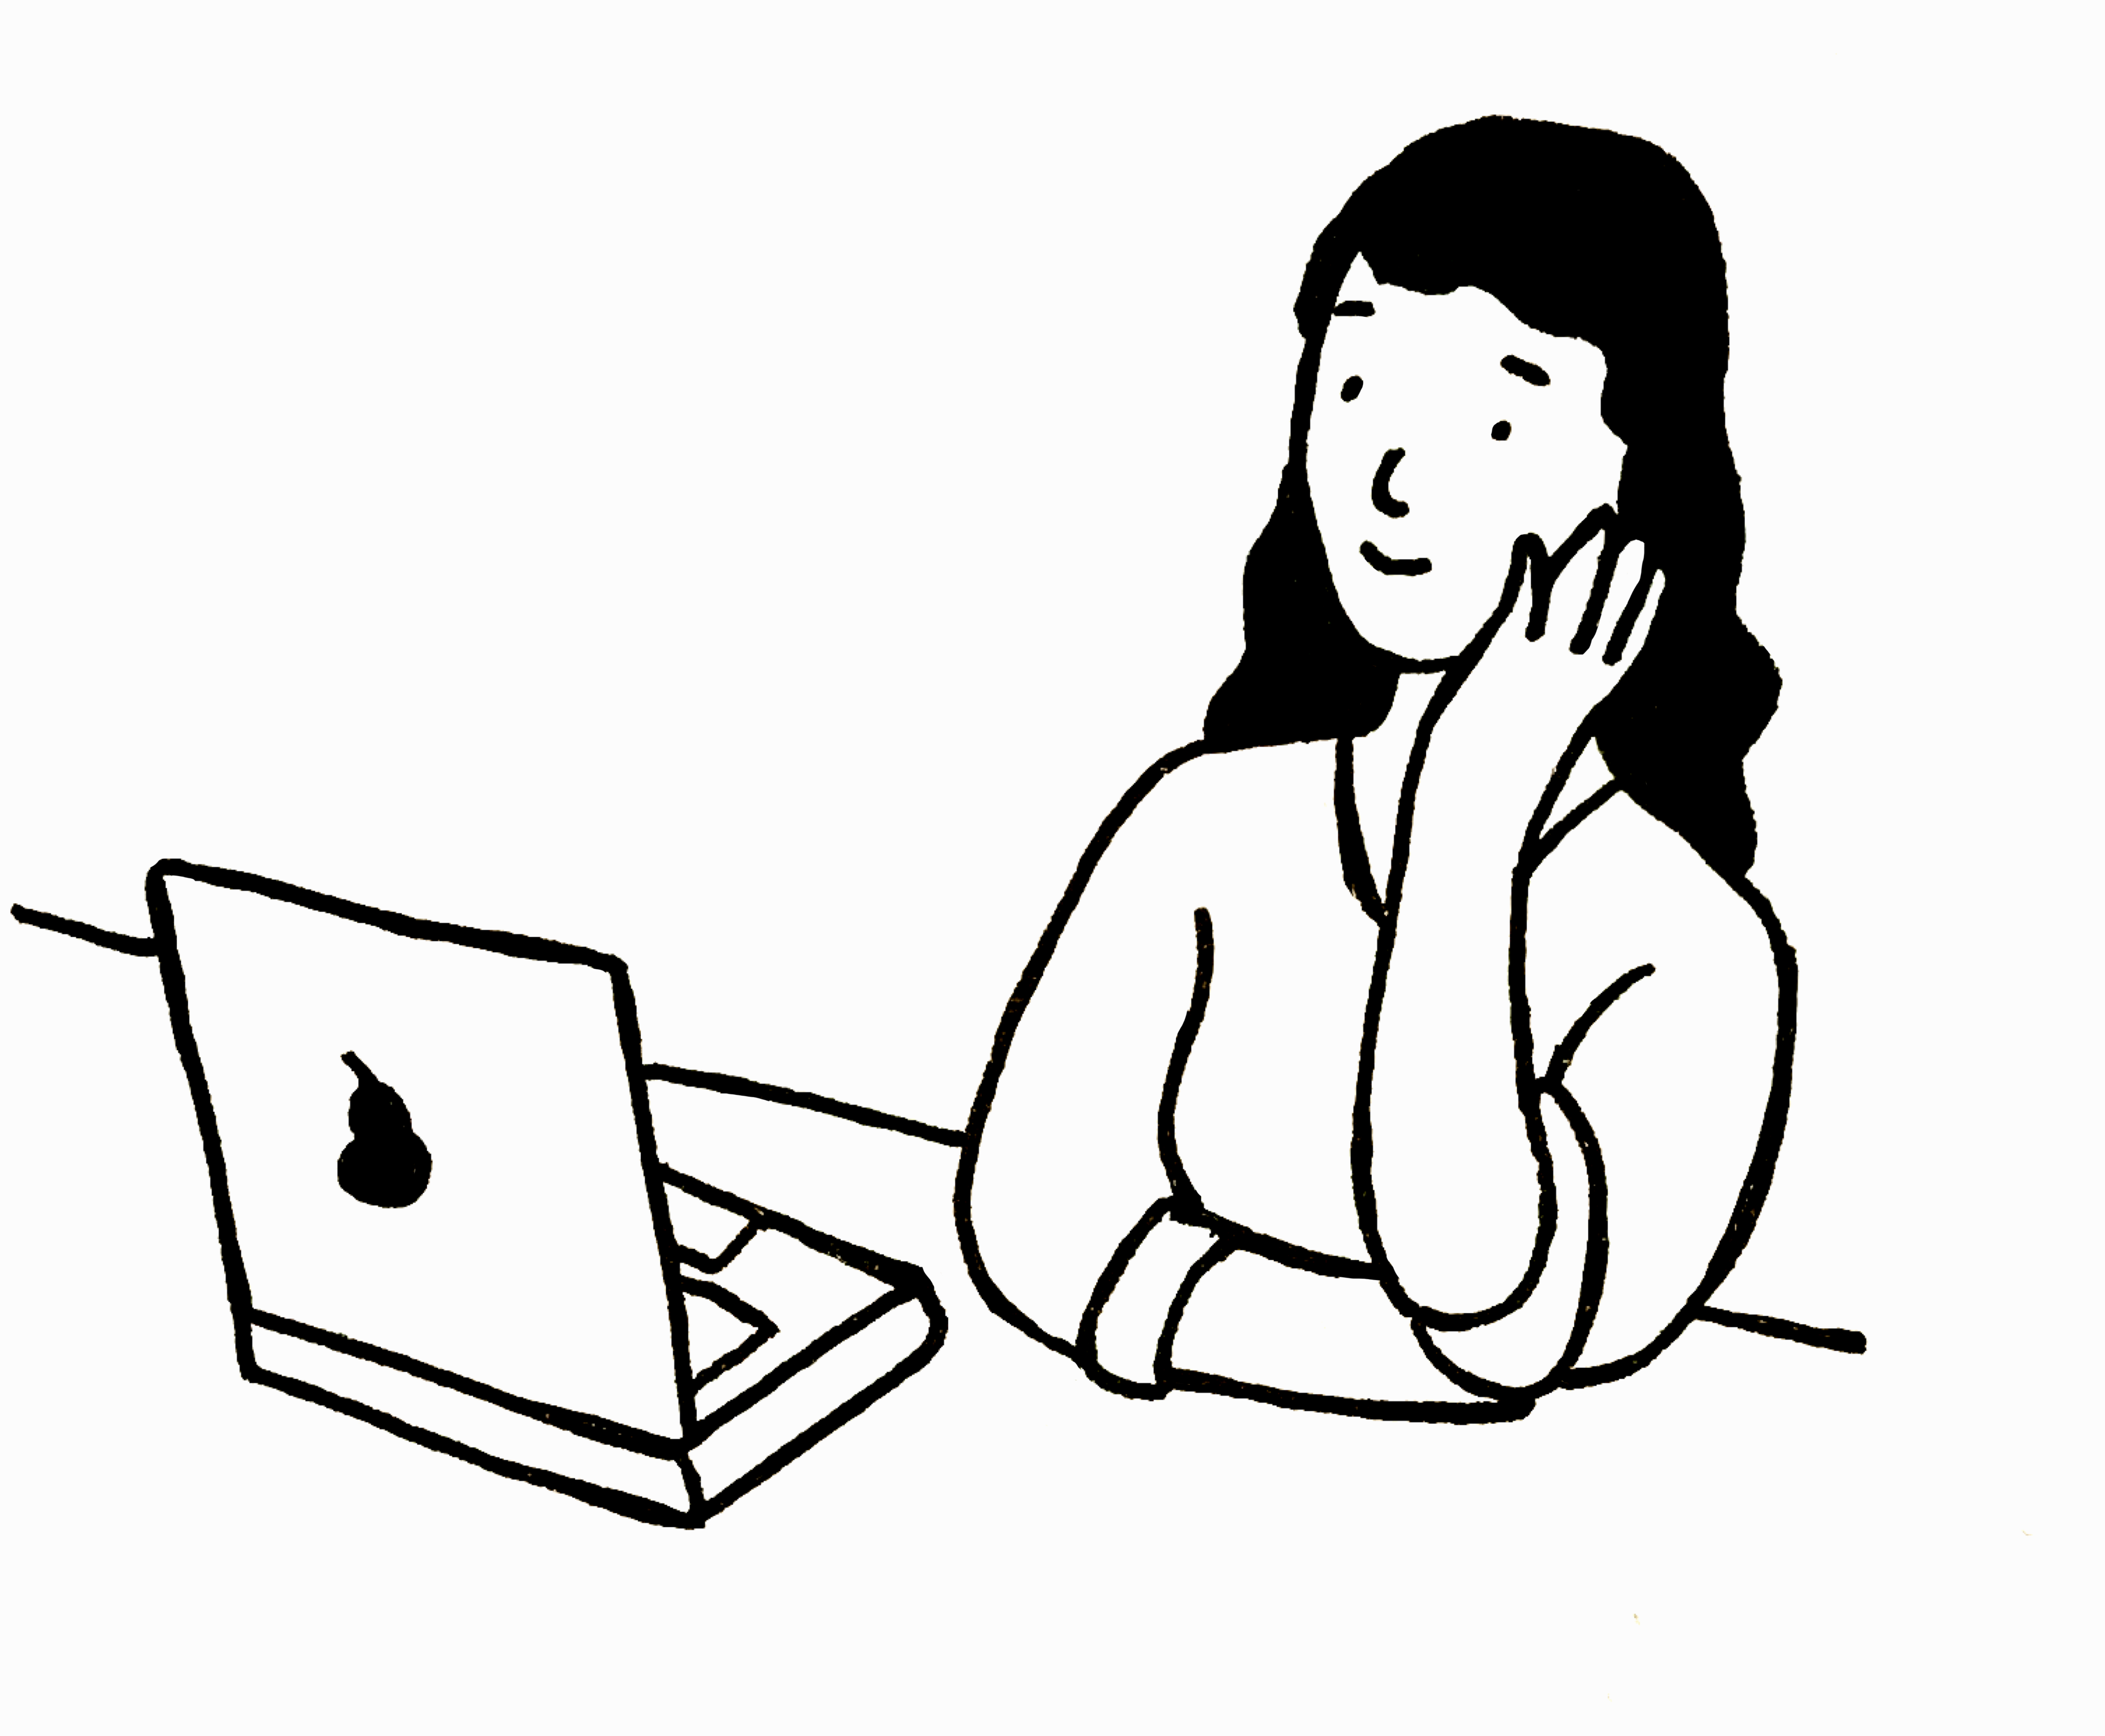 An illustration of a woman sitting at a laptop.